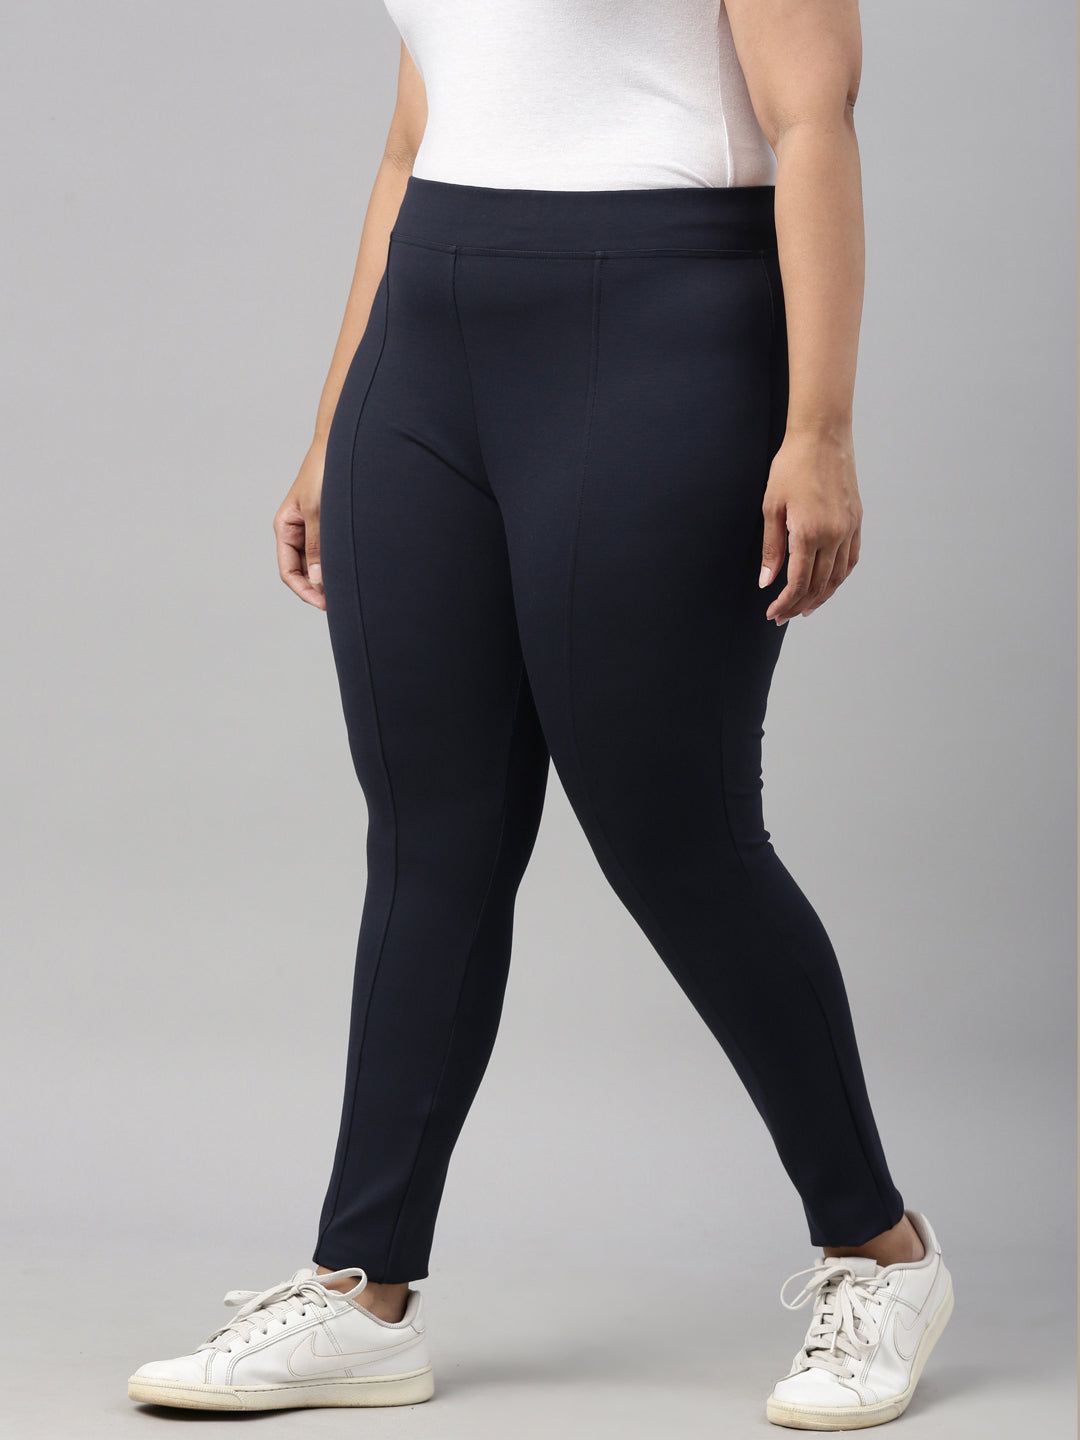 Plus Size navy embossed stretch pants For Women L to 6XL - The Pink Moon